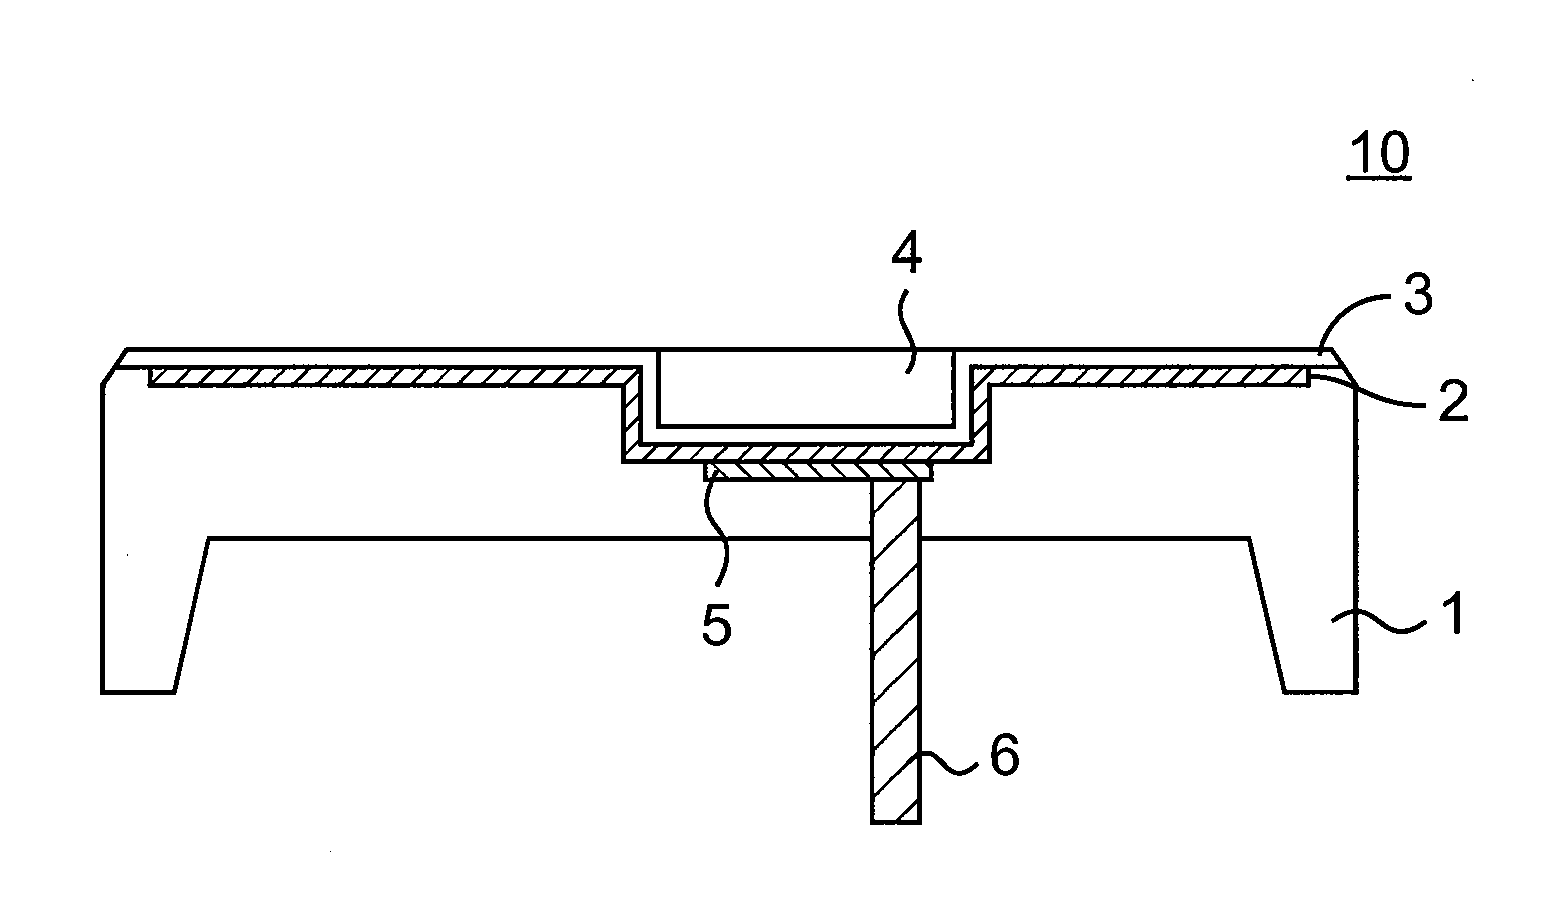 Wireless antenna module and method for producing same